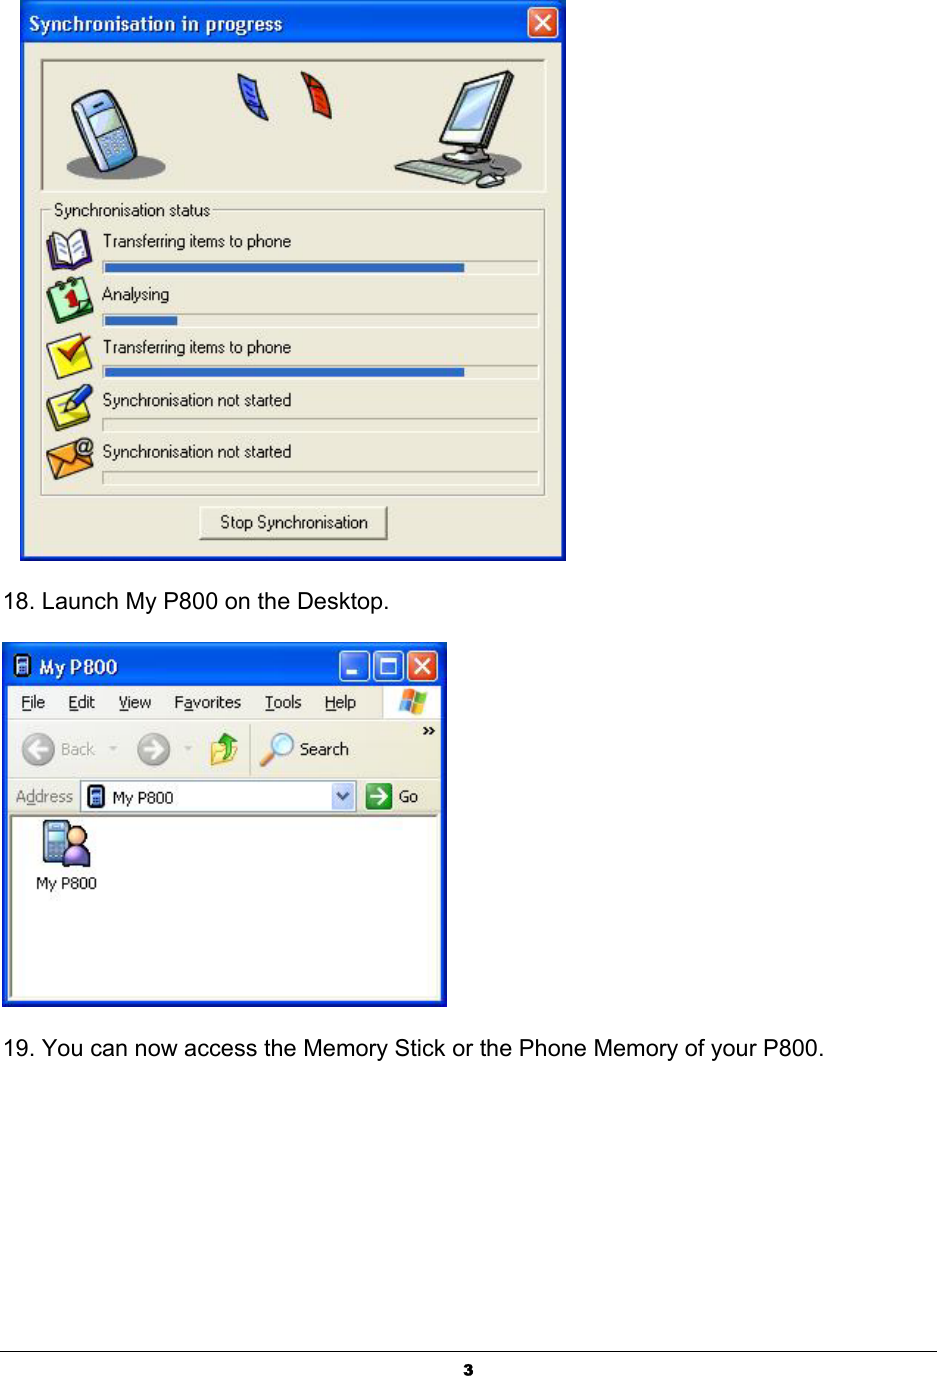  3   18. Launch My P800 on the Desktop.  19. You can now access the Memory Stick or the Phone Memory of your P800.   